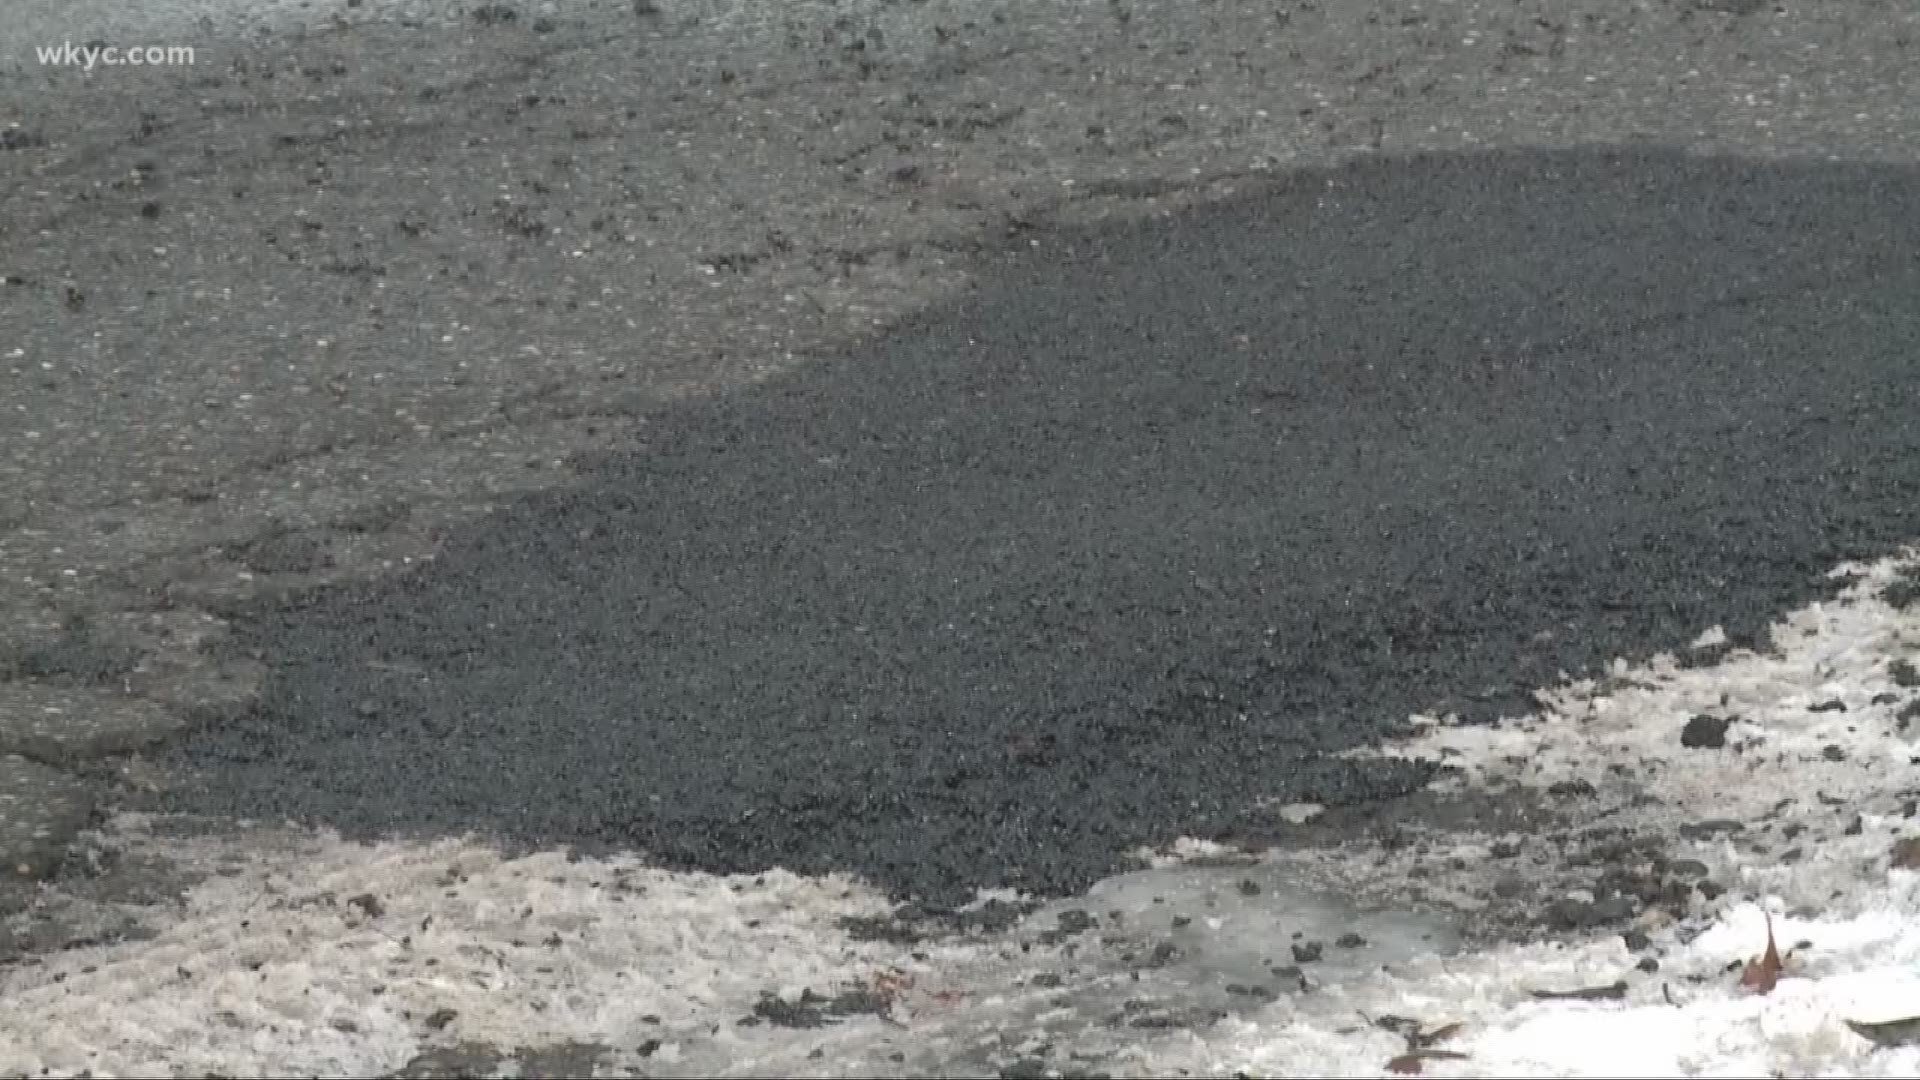 Amani Abraham reports on how city crews are attempting to repair Akron's roads during the winter.